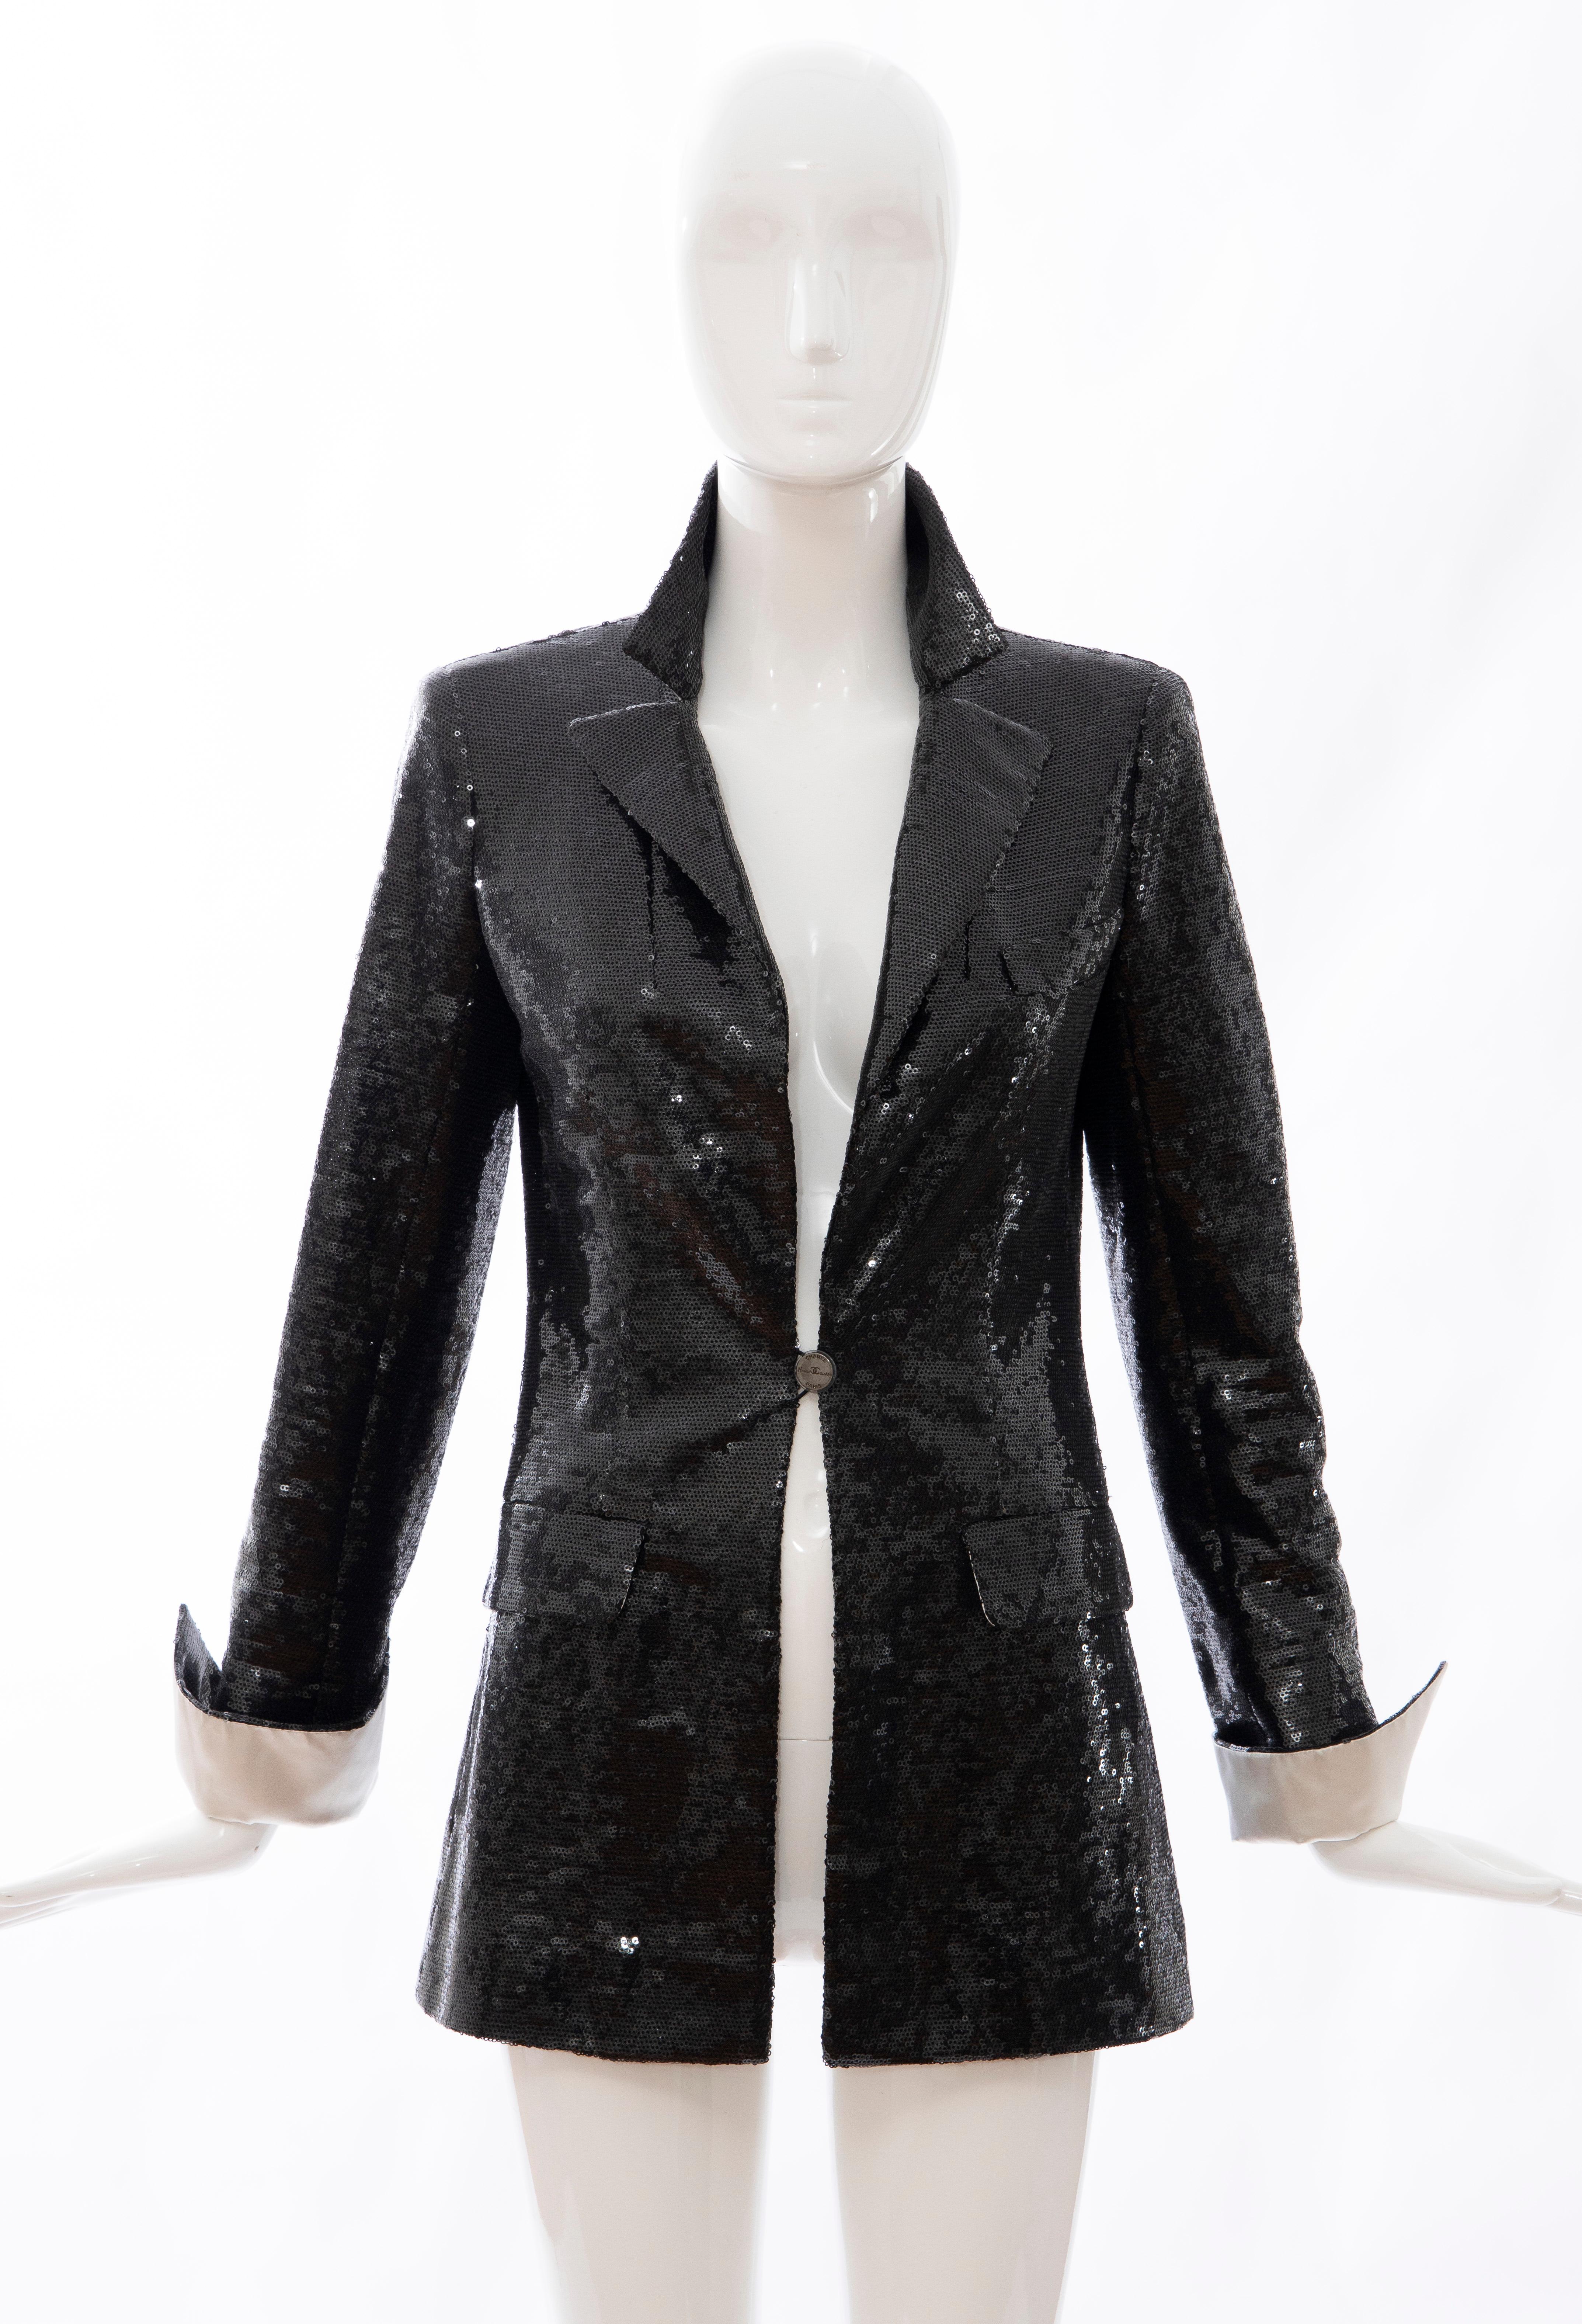 Chanel, Cruise 2009, black embroidered sequin evening jacket with two front flap pockets, ivory silk trim at cuffs. single front button closure, signature interior chain and fully lined in black silk.

EU. 36, US. 4

Bust 33, Waist 31, Shoulder: 15,